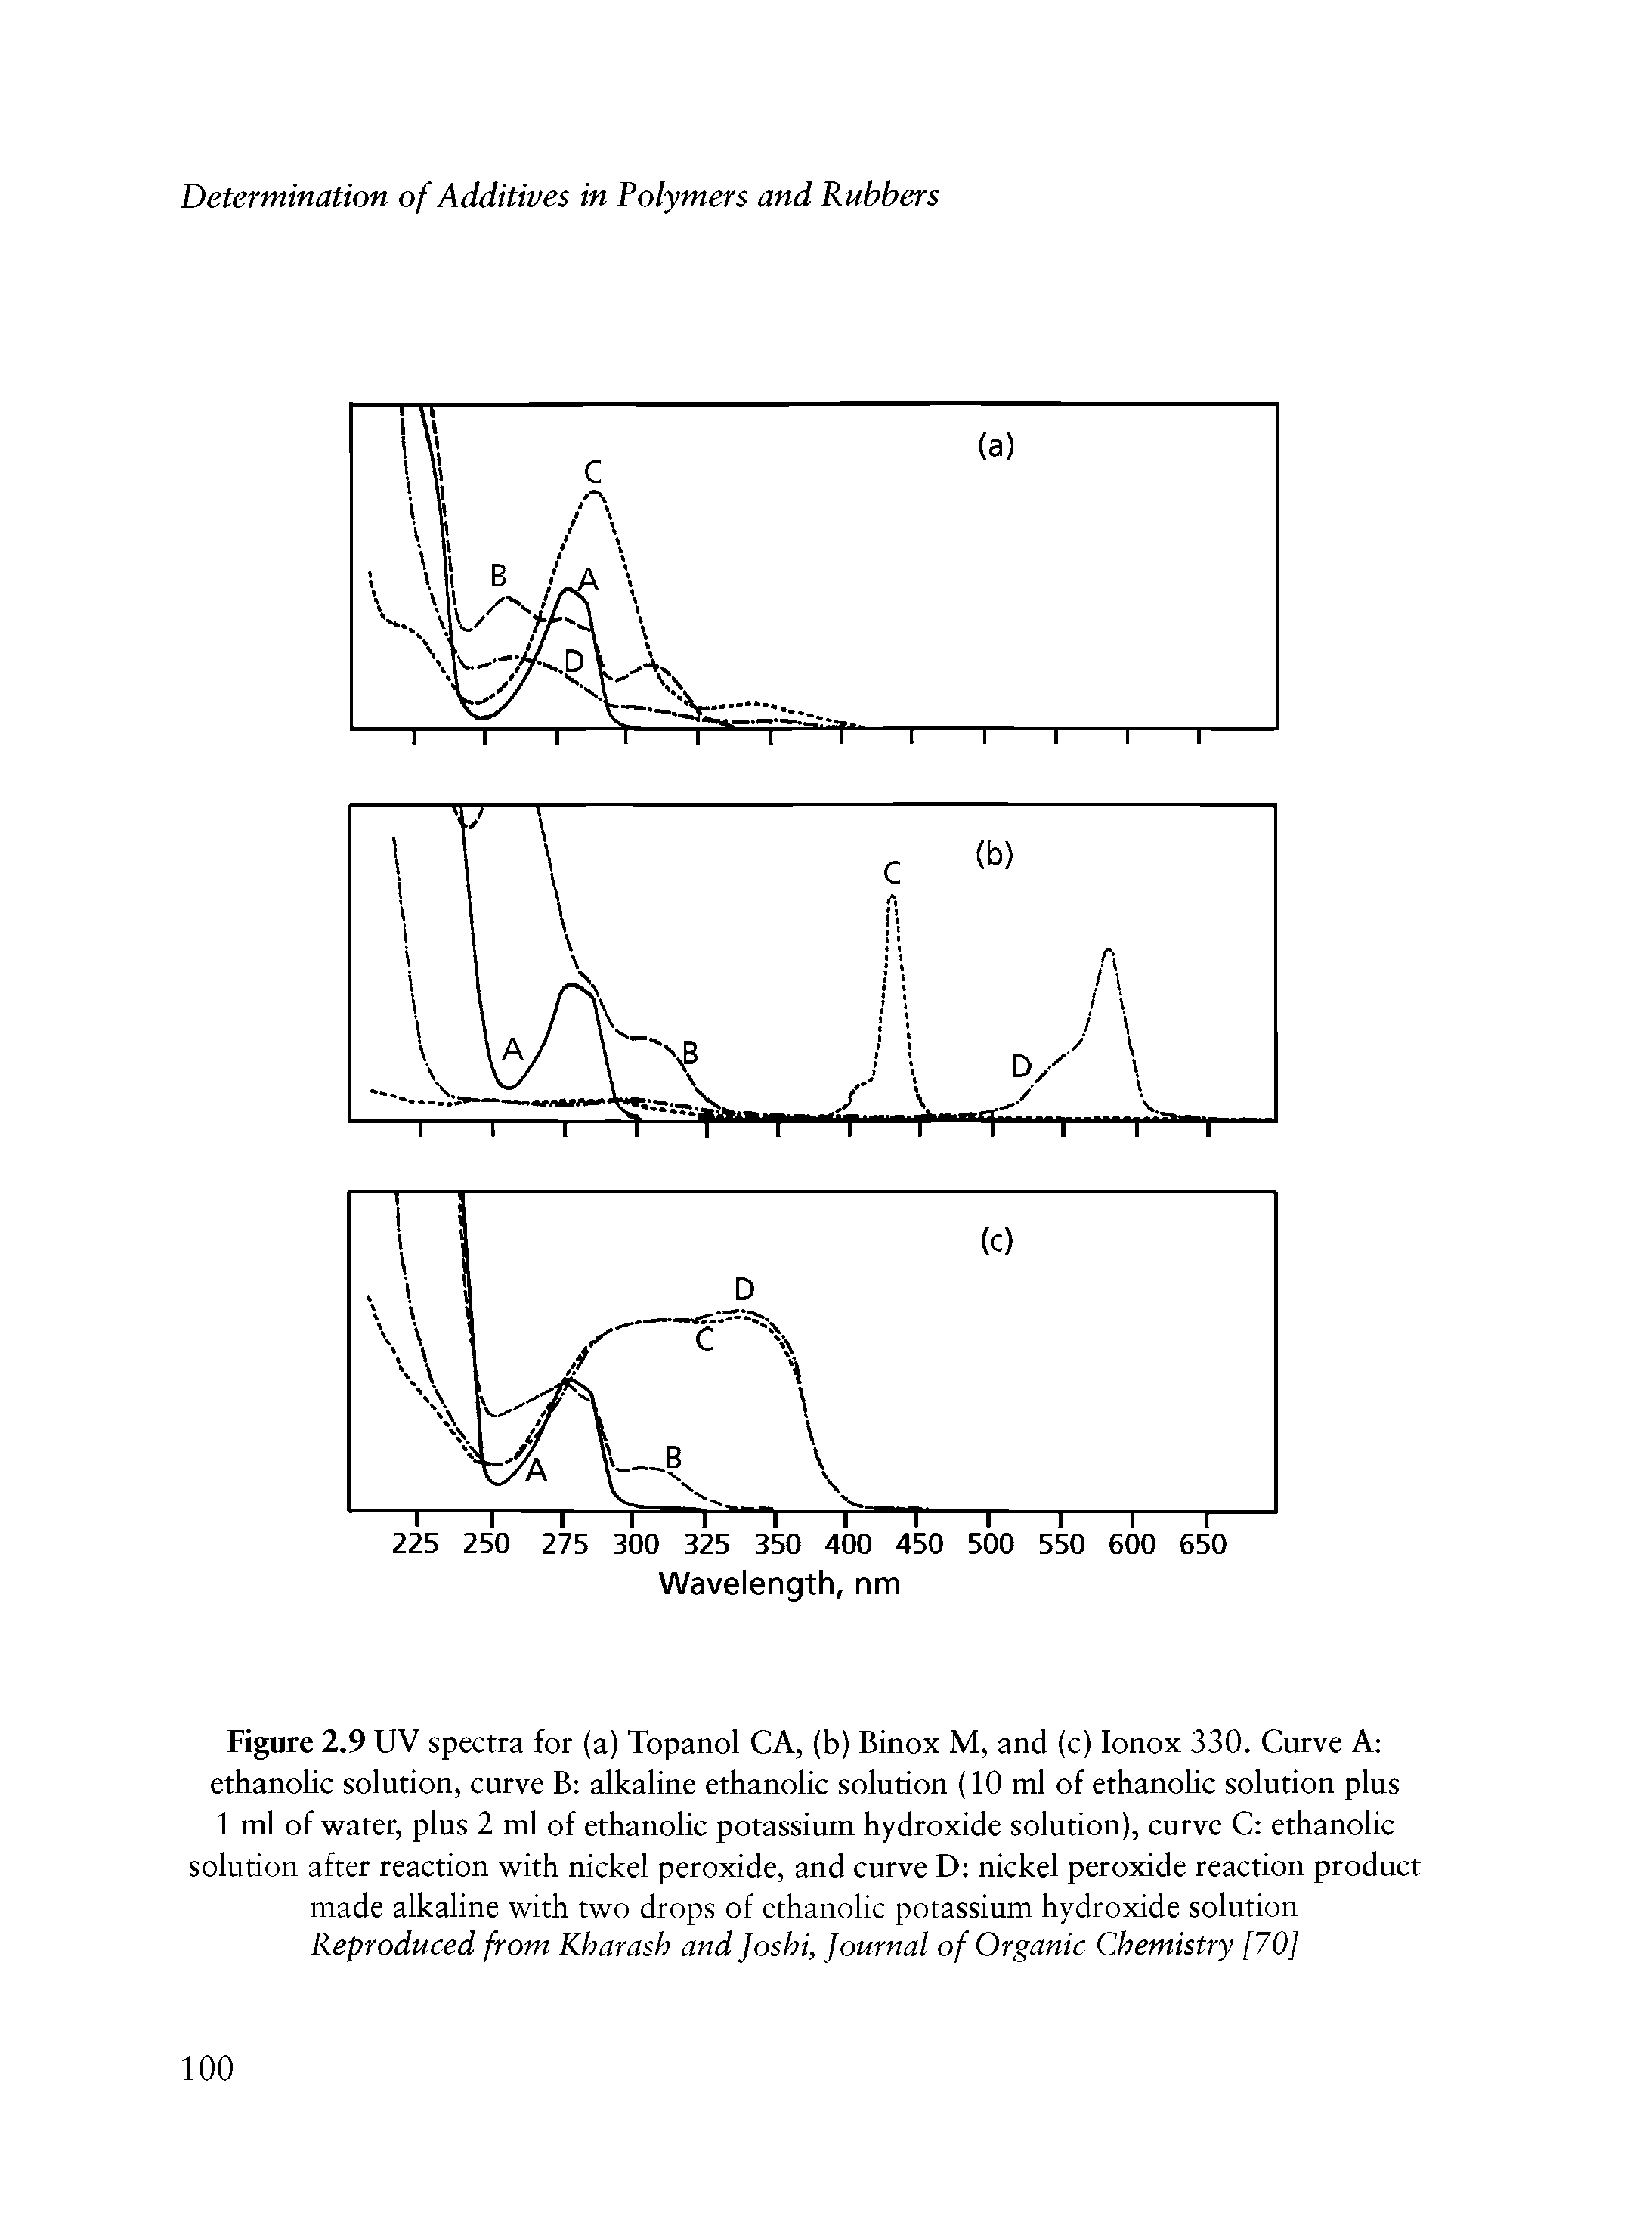 Figure 2.9 UV spectra for (a) Topanol CA, (b) Binox M, and (c) lonox 330. Curve A ethanolic solution, curve B alkaline ethanolic solution (10 ml of ethanolic solution plus 1 ml of water, plus 2 ml of ethanolic potassium hydroxide solution), curve C ethanolic solution after reaction with nickel peroxide, and curve D nickel peroxide reaction product made alkaline with two drops of ethanolic potassium hydroxide solution Reproduced from Kharash and Joshi, Journal of Organic Chemistry [70]...